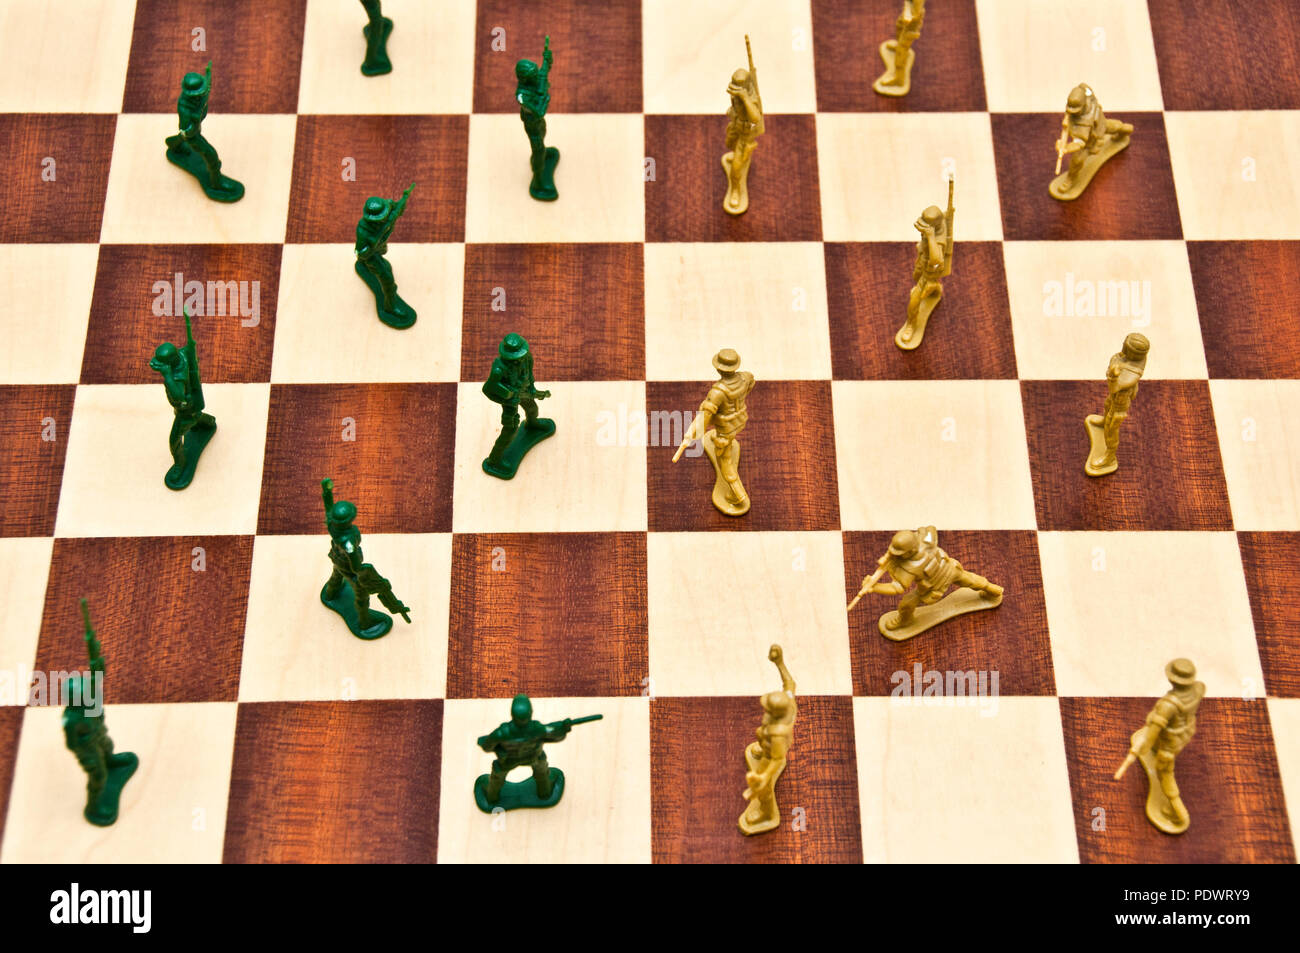 plastic toy soldiers on a chessboard Stock Photo